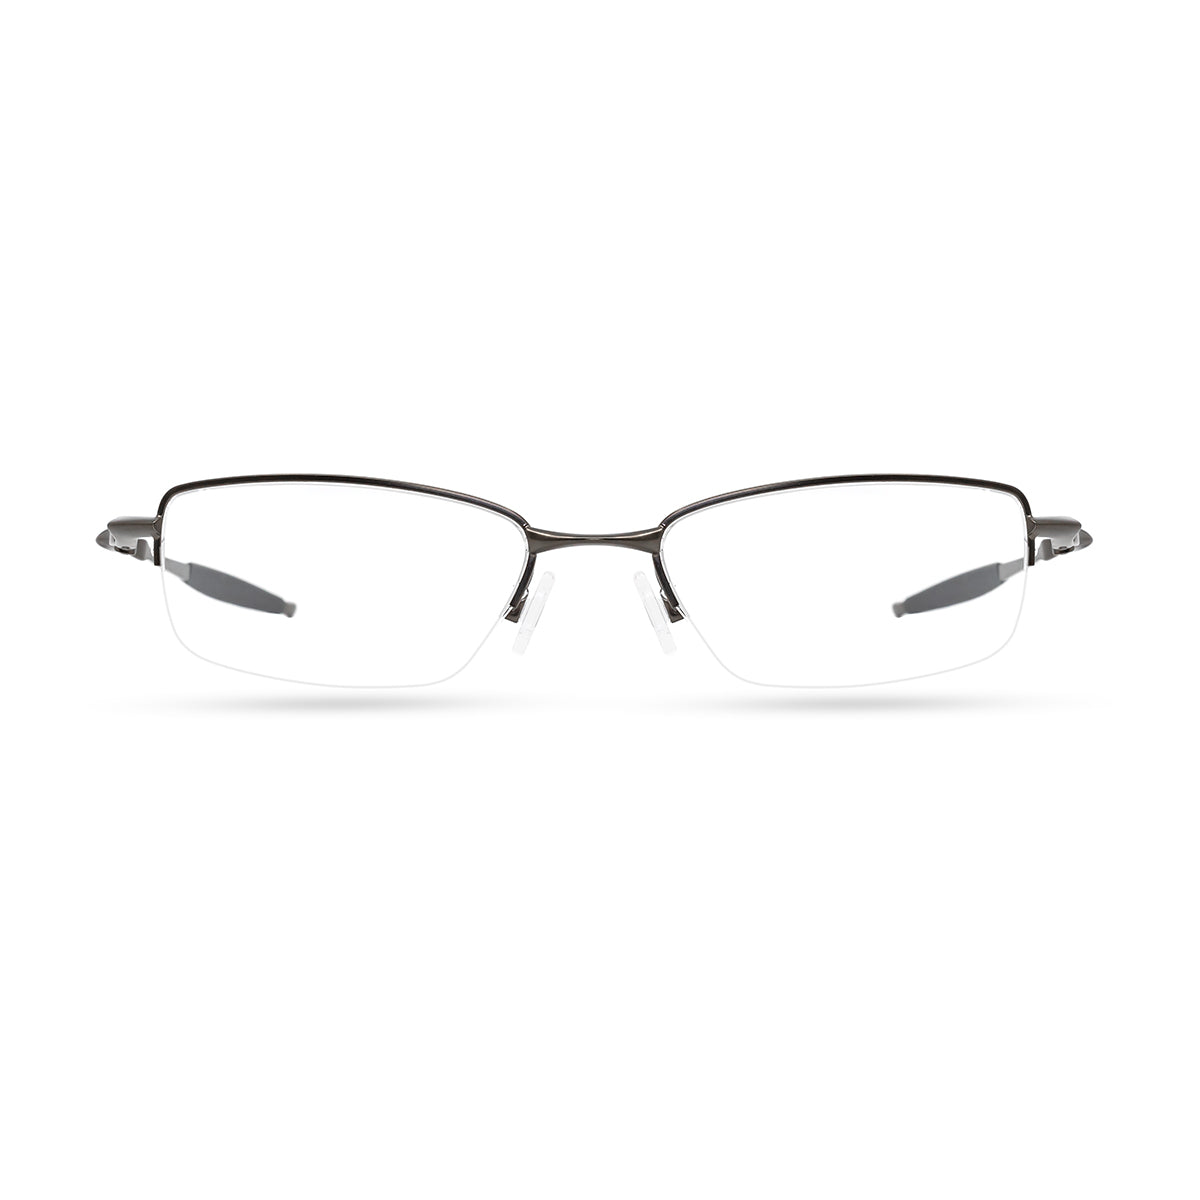 OAKLEY OX3129 COVERDRIVE 03 spectacle-frame